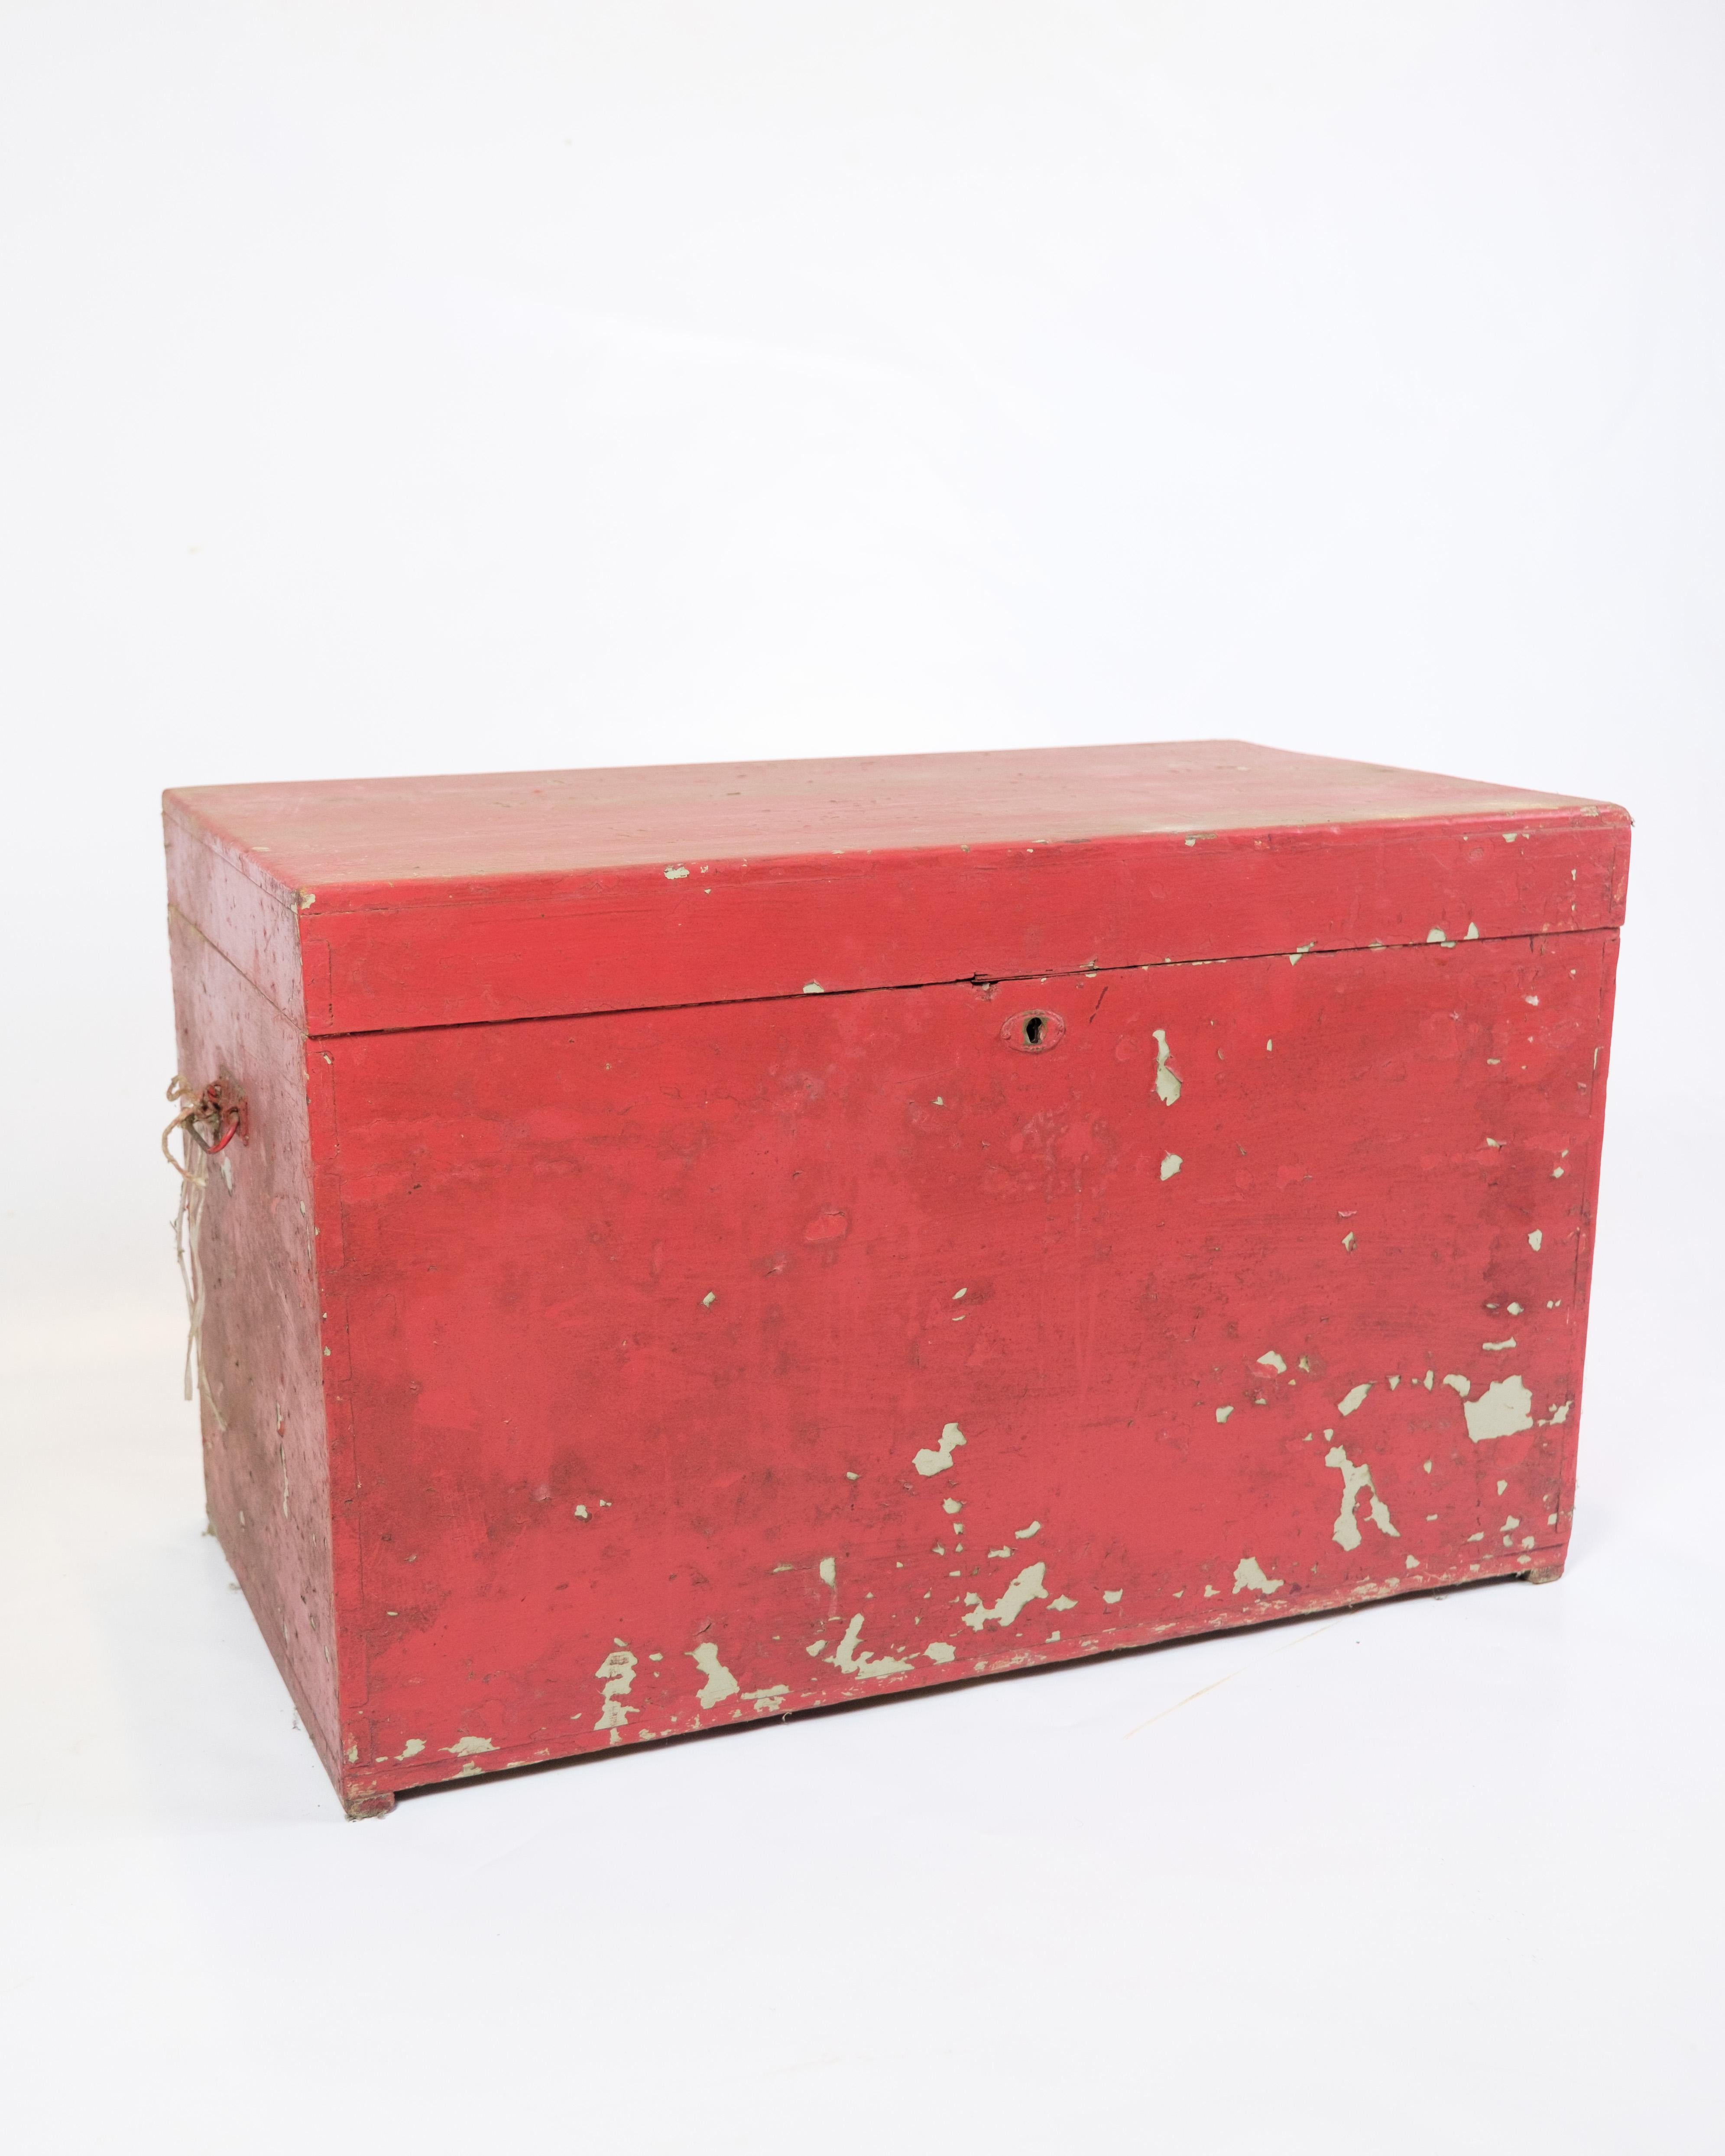 Other Antique Red Painted Chest From 1830s For Sale